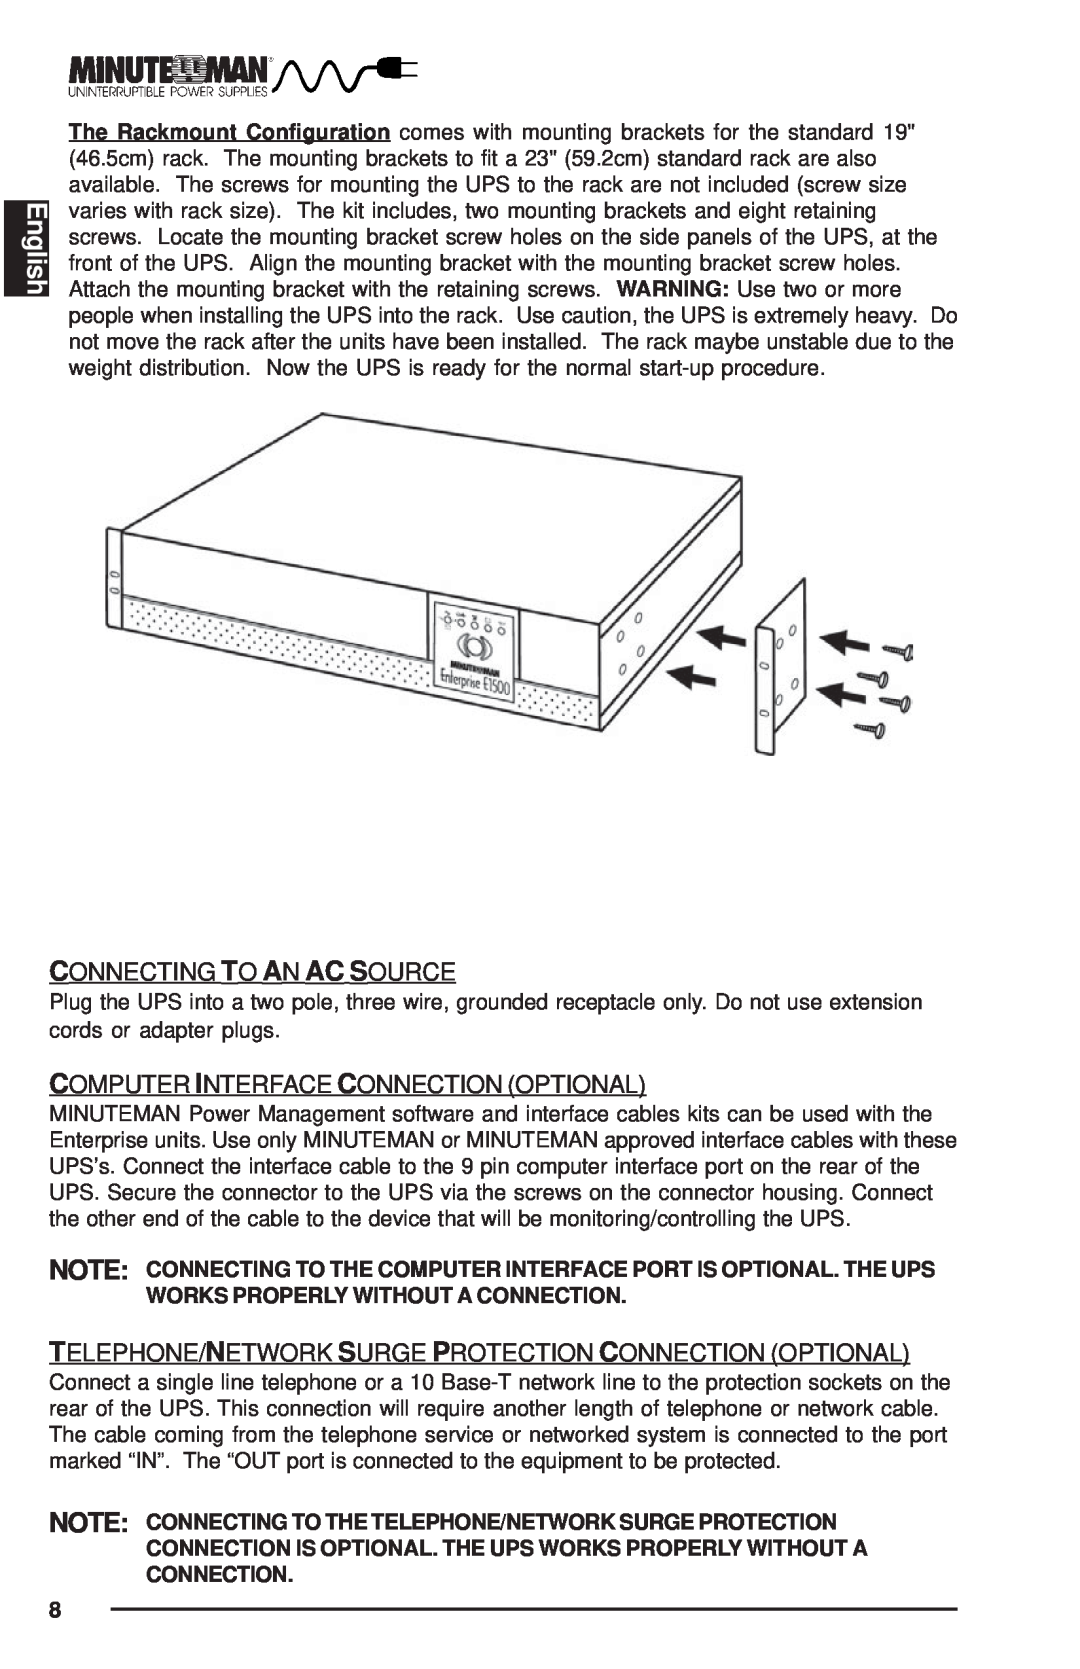 Rackmount Solutions Enterprise Series manual English, Connecting To An Ac Source, Computer Interface Connection Optional 